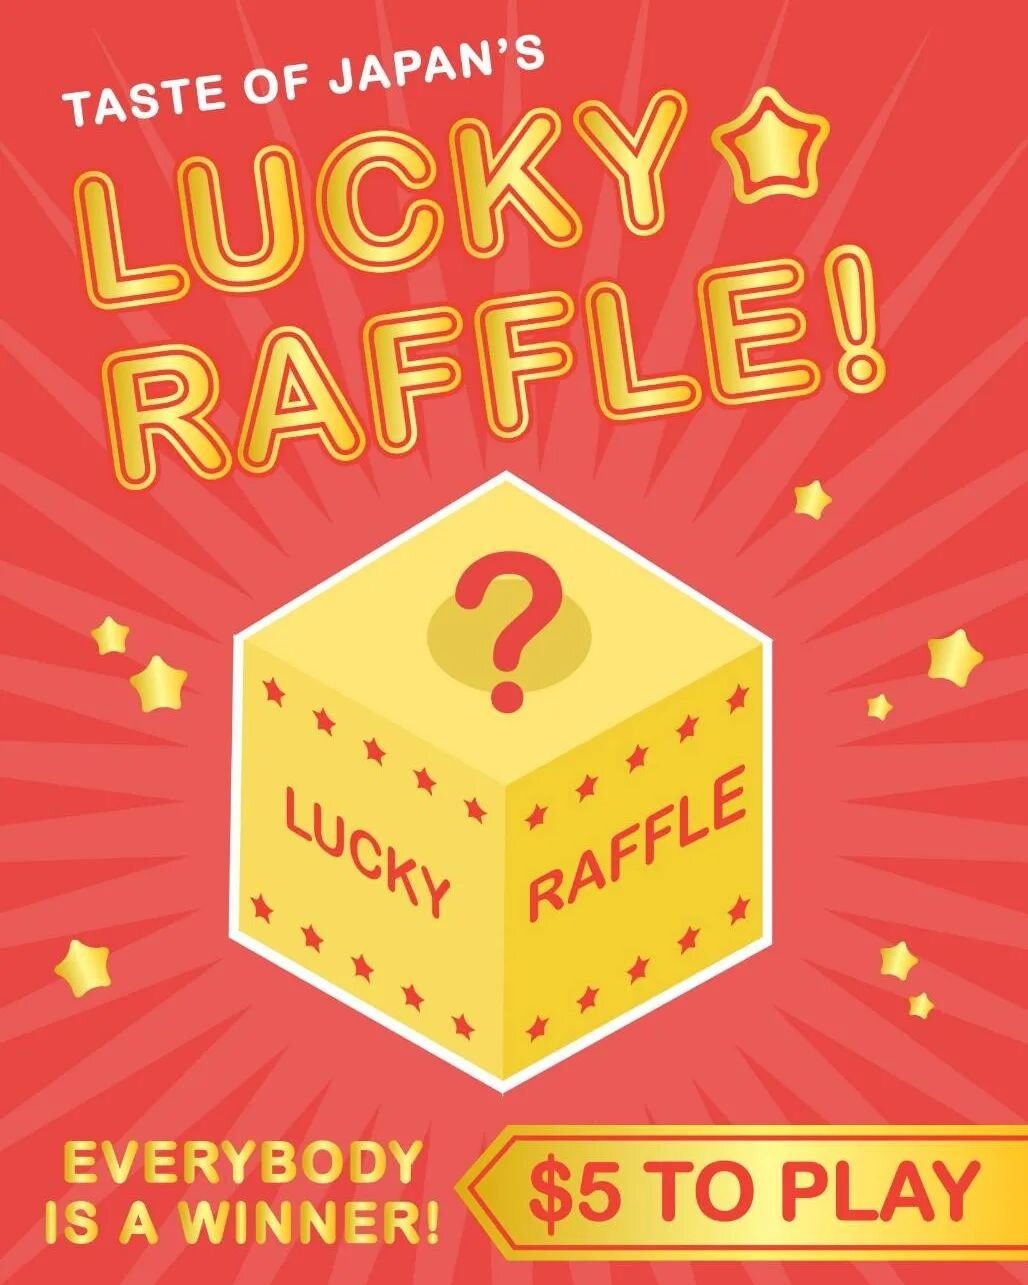 🎫🎟️ WE GOT RAFFLE !! A golden box filled with special prizes such as Round 1 Play Card, up to $25 coupons &amp; gift cards from food vendors, featured drinks, snacks and more!
-
▶️Come to the INFO BOOTH to play
-
The excitement for this weekend jus